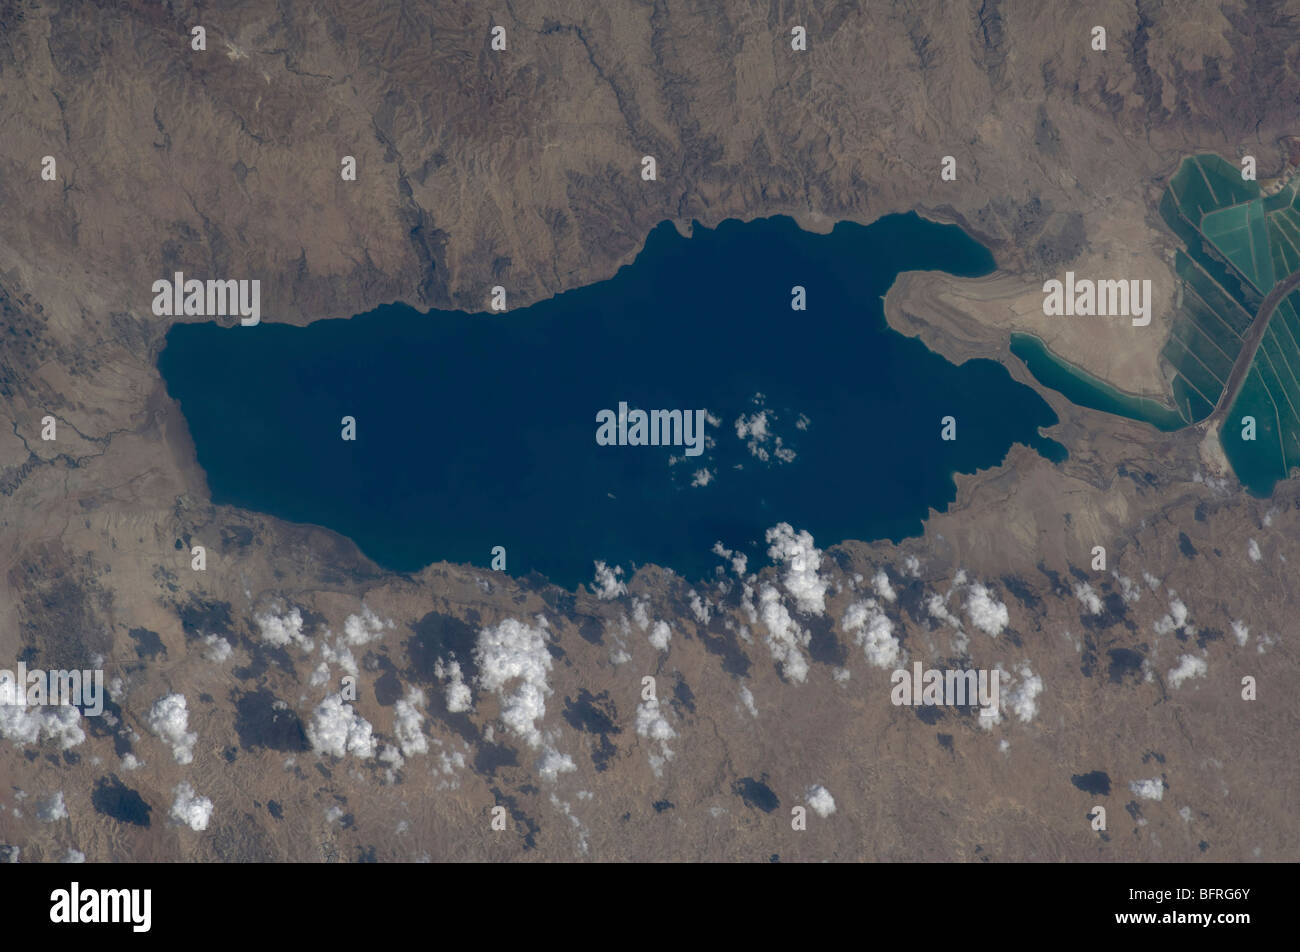 Part of the Dead Sea and parts of Israel and Jordan. Stock Photo